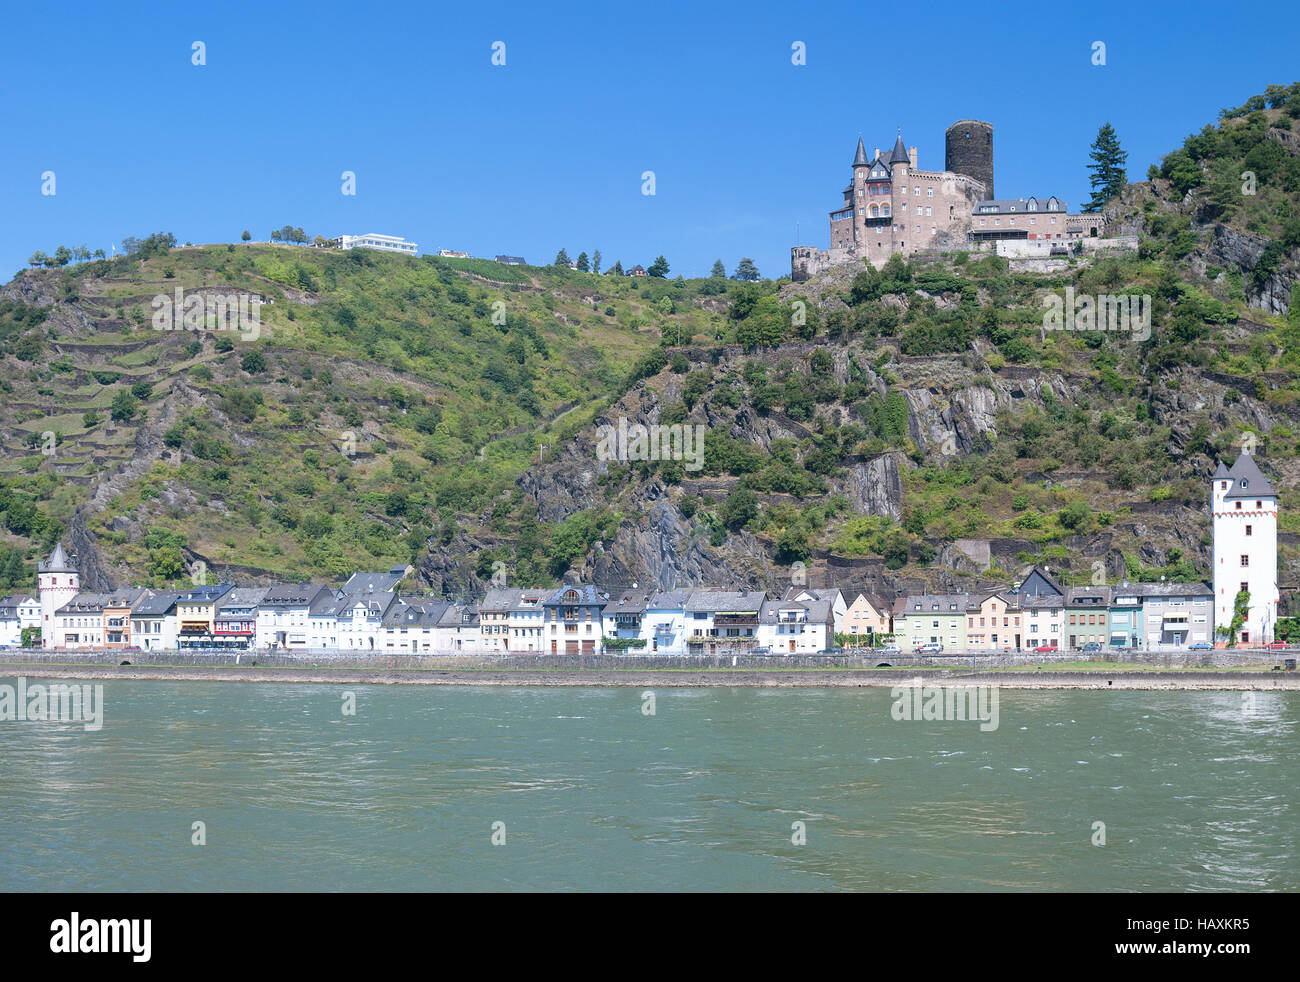 Sankt Goarshausen,middle Rhine Valley,Germany Stock Photo